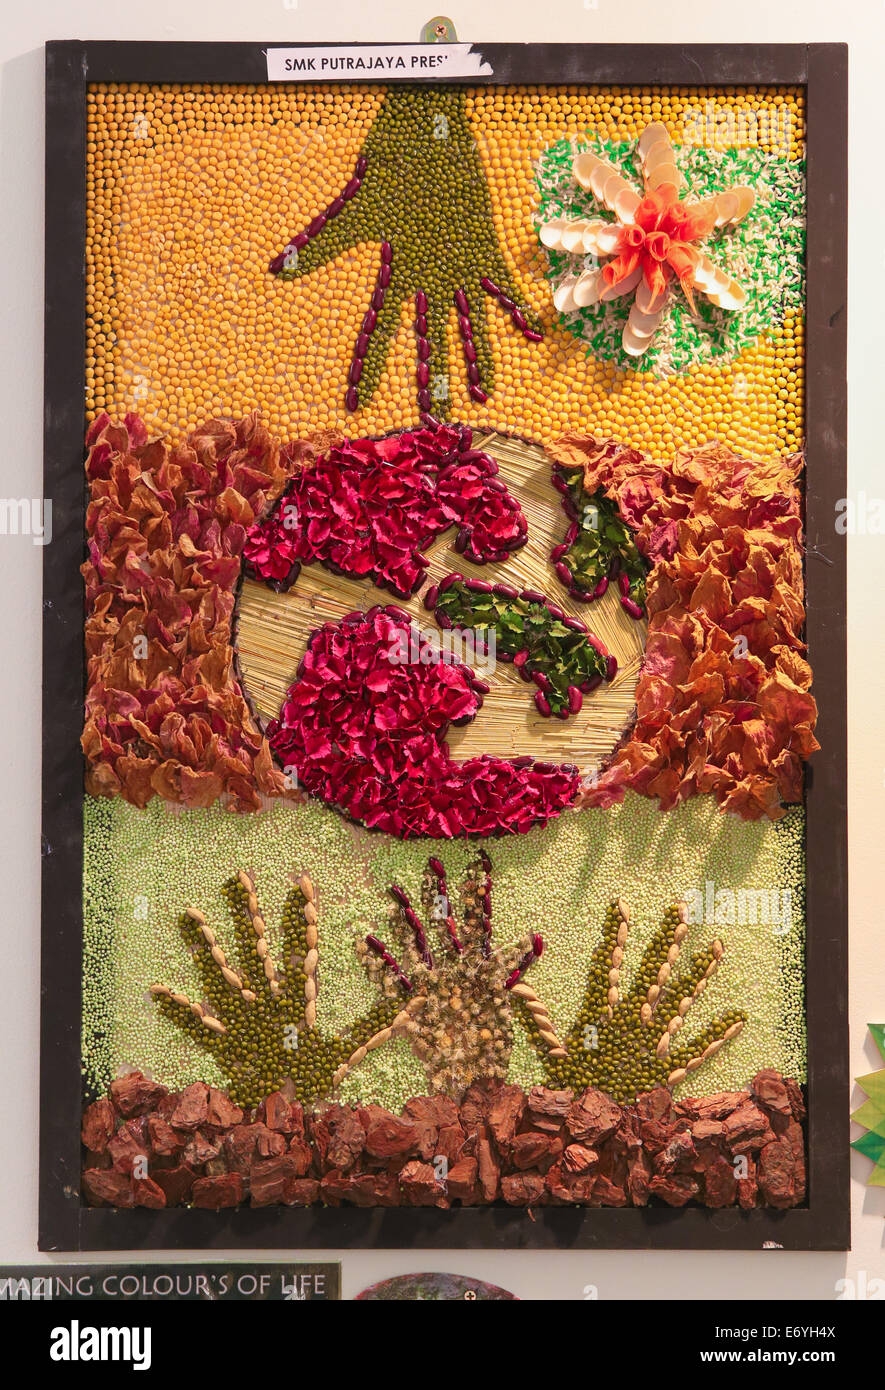 Picture of world peace made of nature elements such as flower and beans at FLORIA event held in Putrajaya, Malaysia. Stock Photo